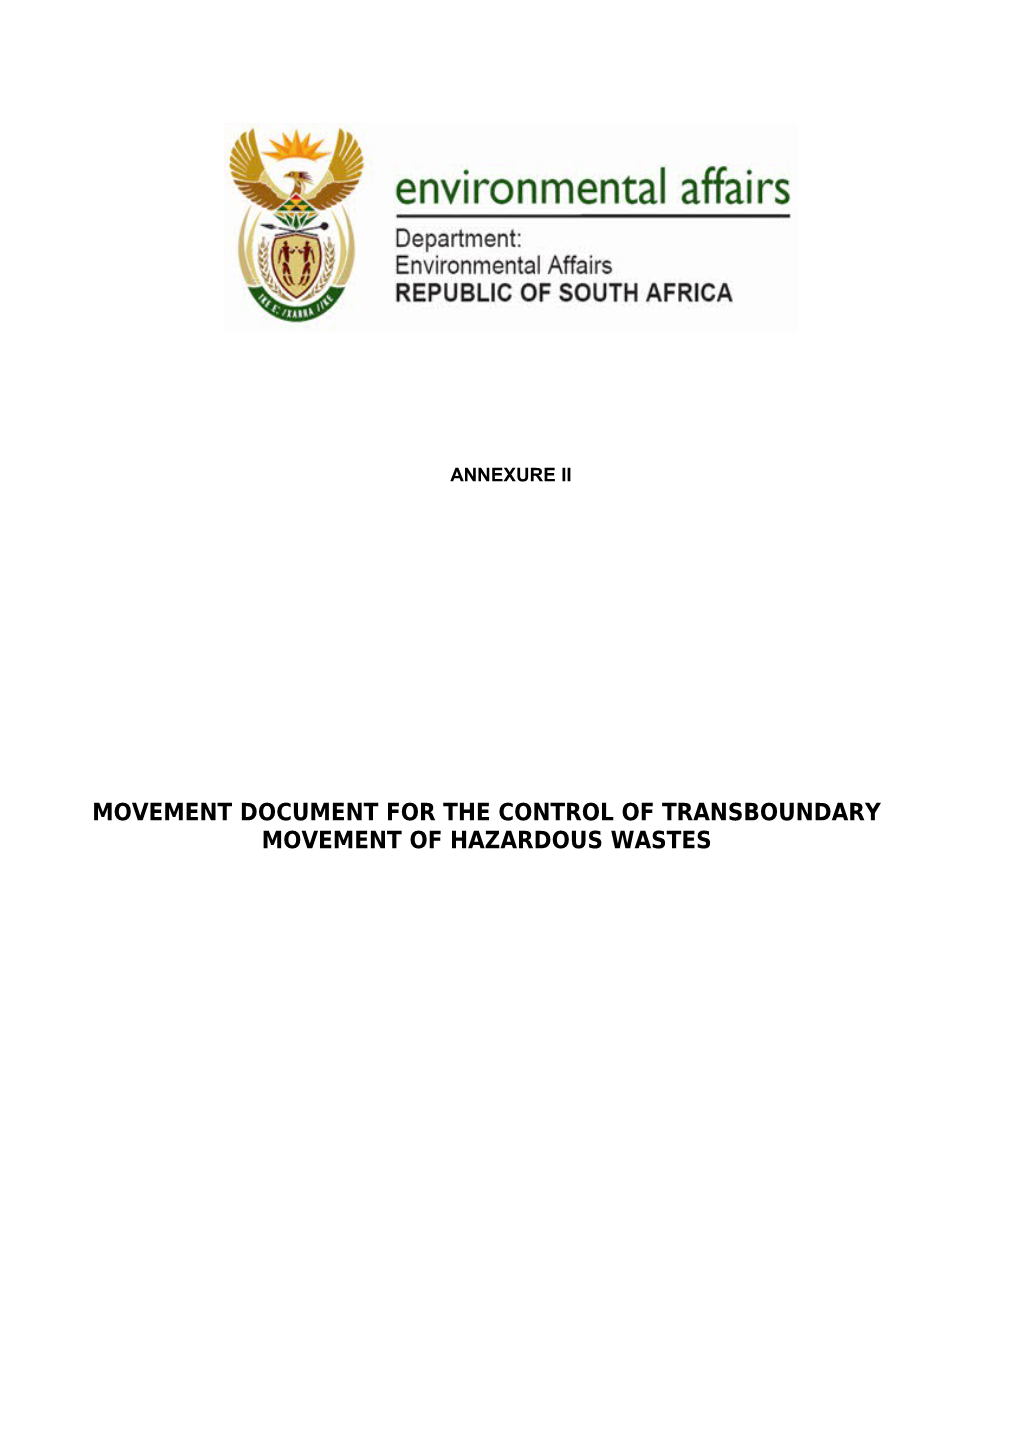 Movement Document for the Control of Transboundary Movement of Hazardous Wastes